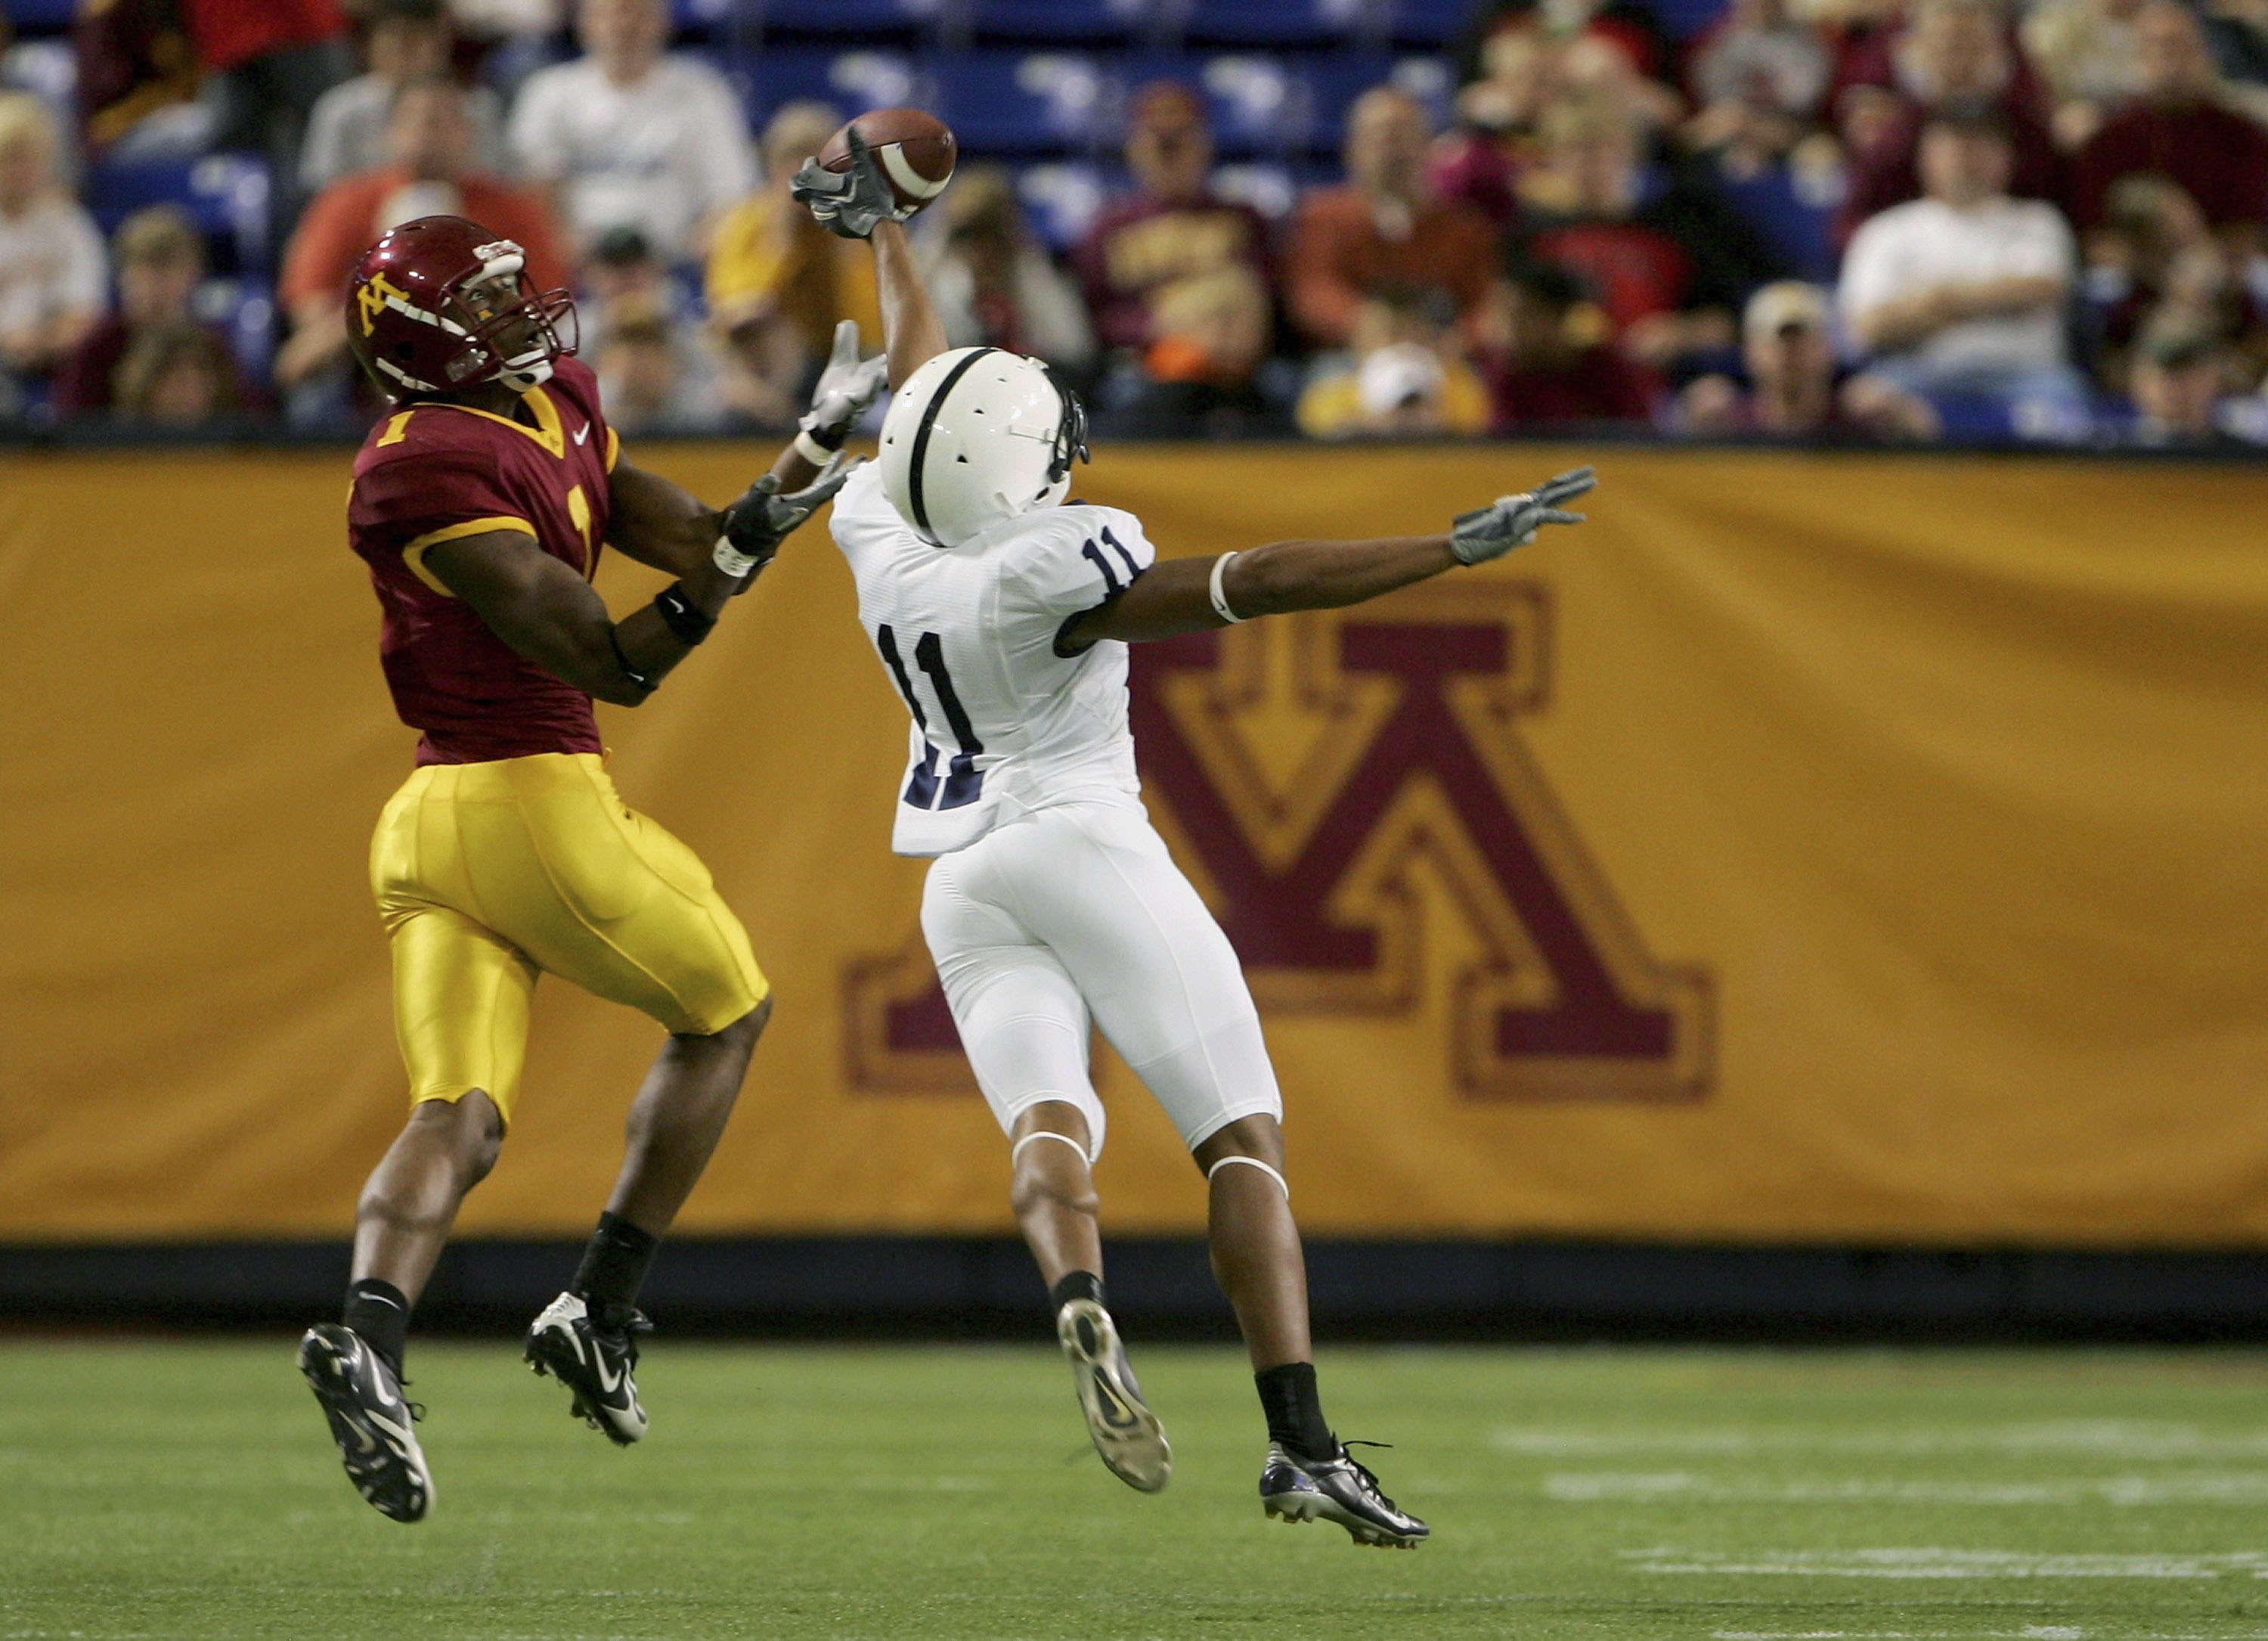 Minnesota Football: The Top 20 Golden Gophers of All Time